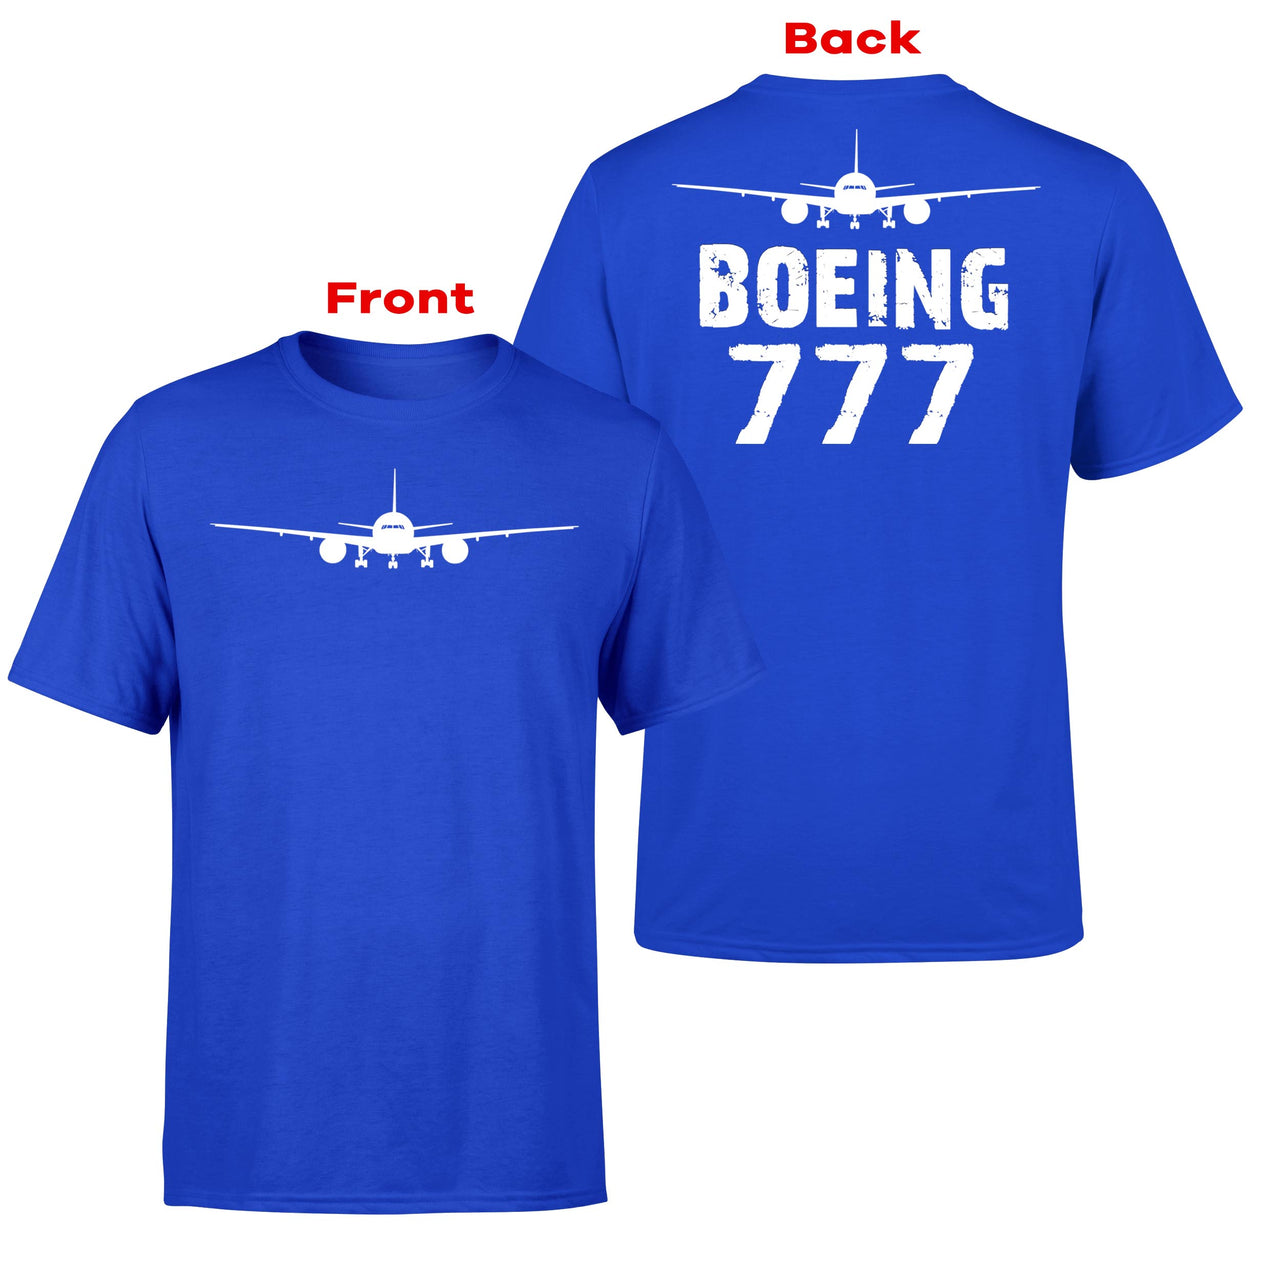 Boeing 777 & Plane Designed Double-Side T-Shirts